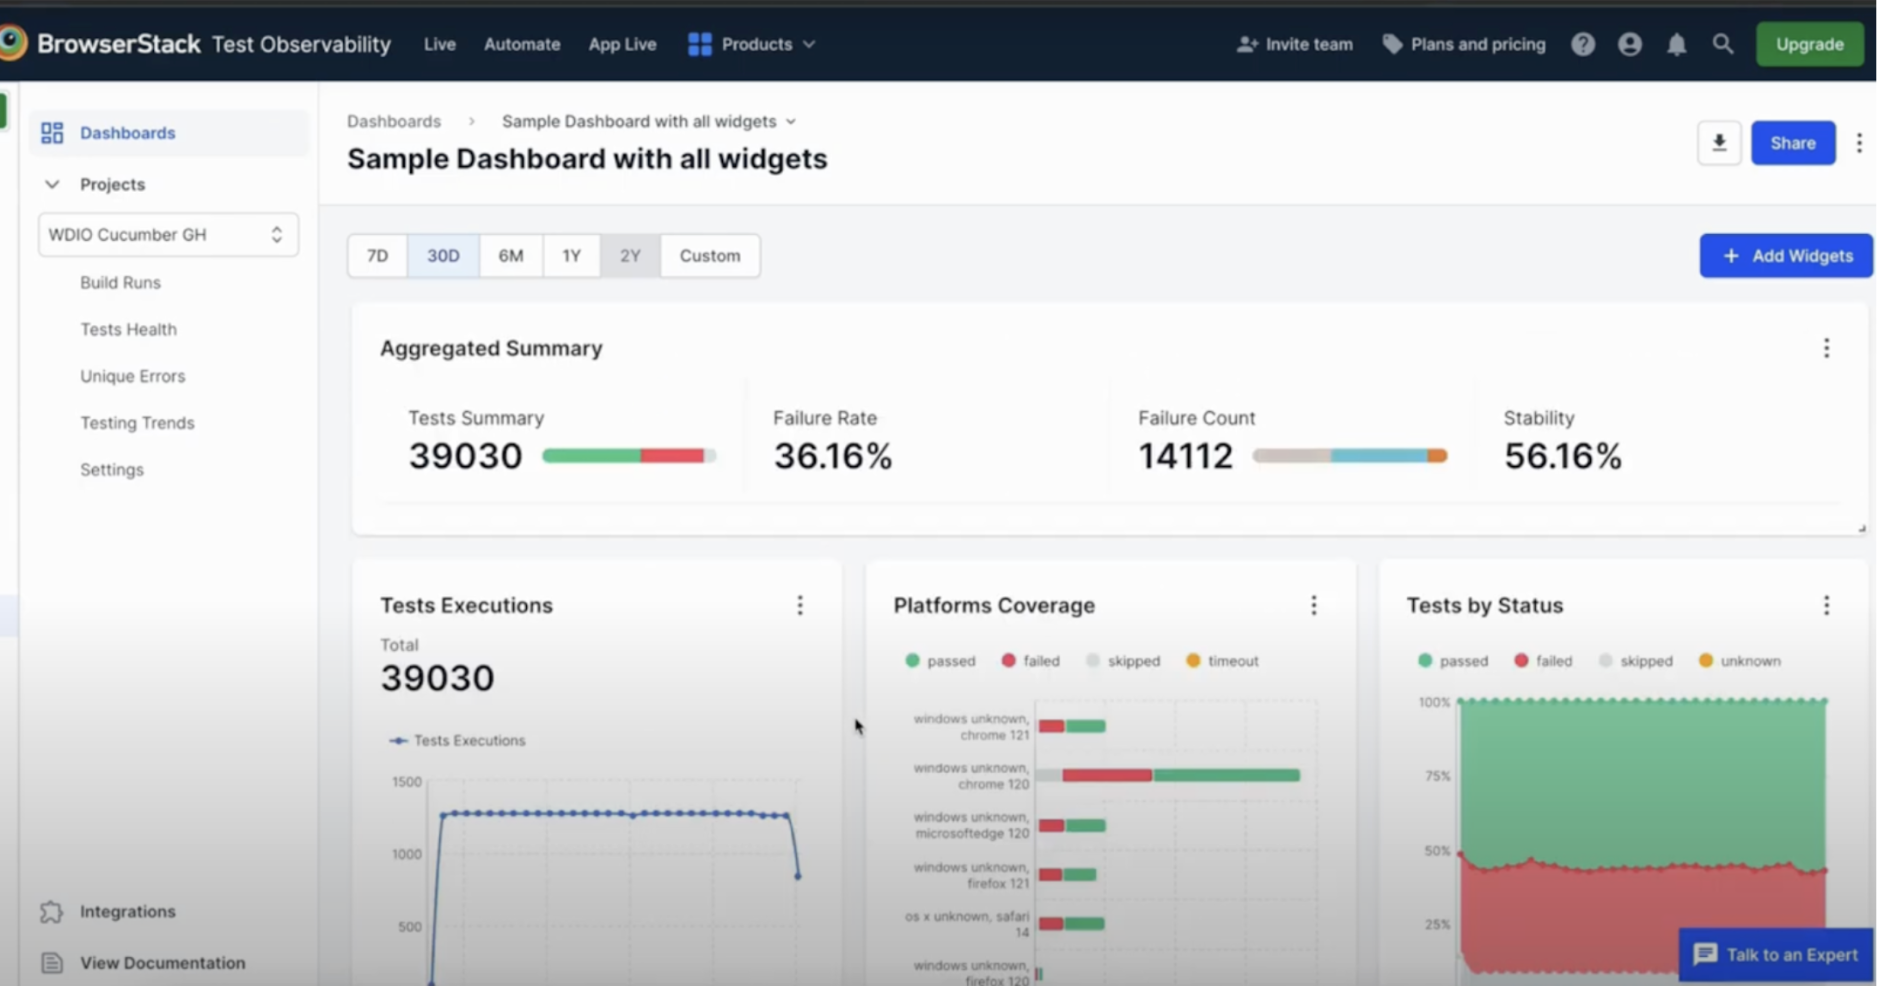 Customize Dashboards and Report in Test Observability